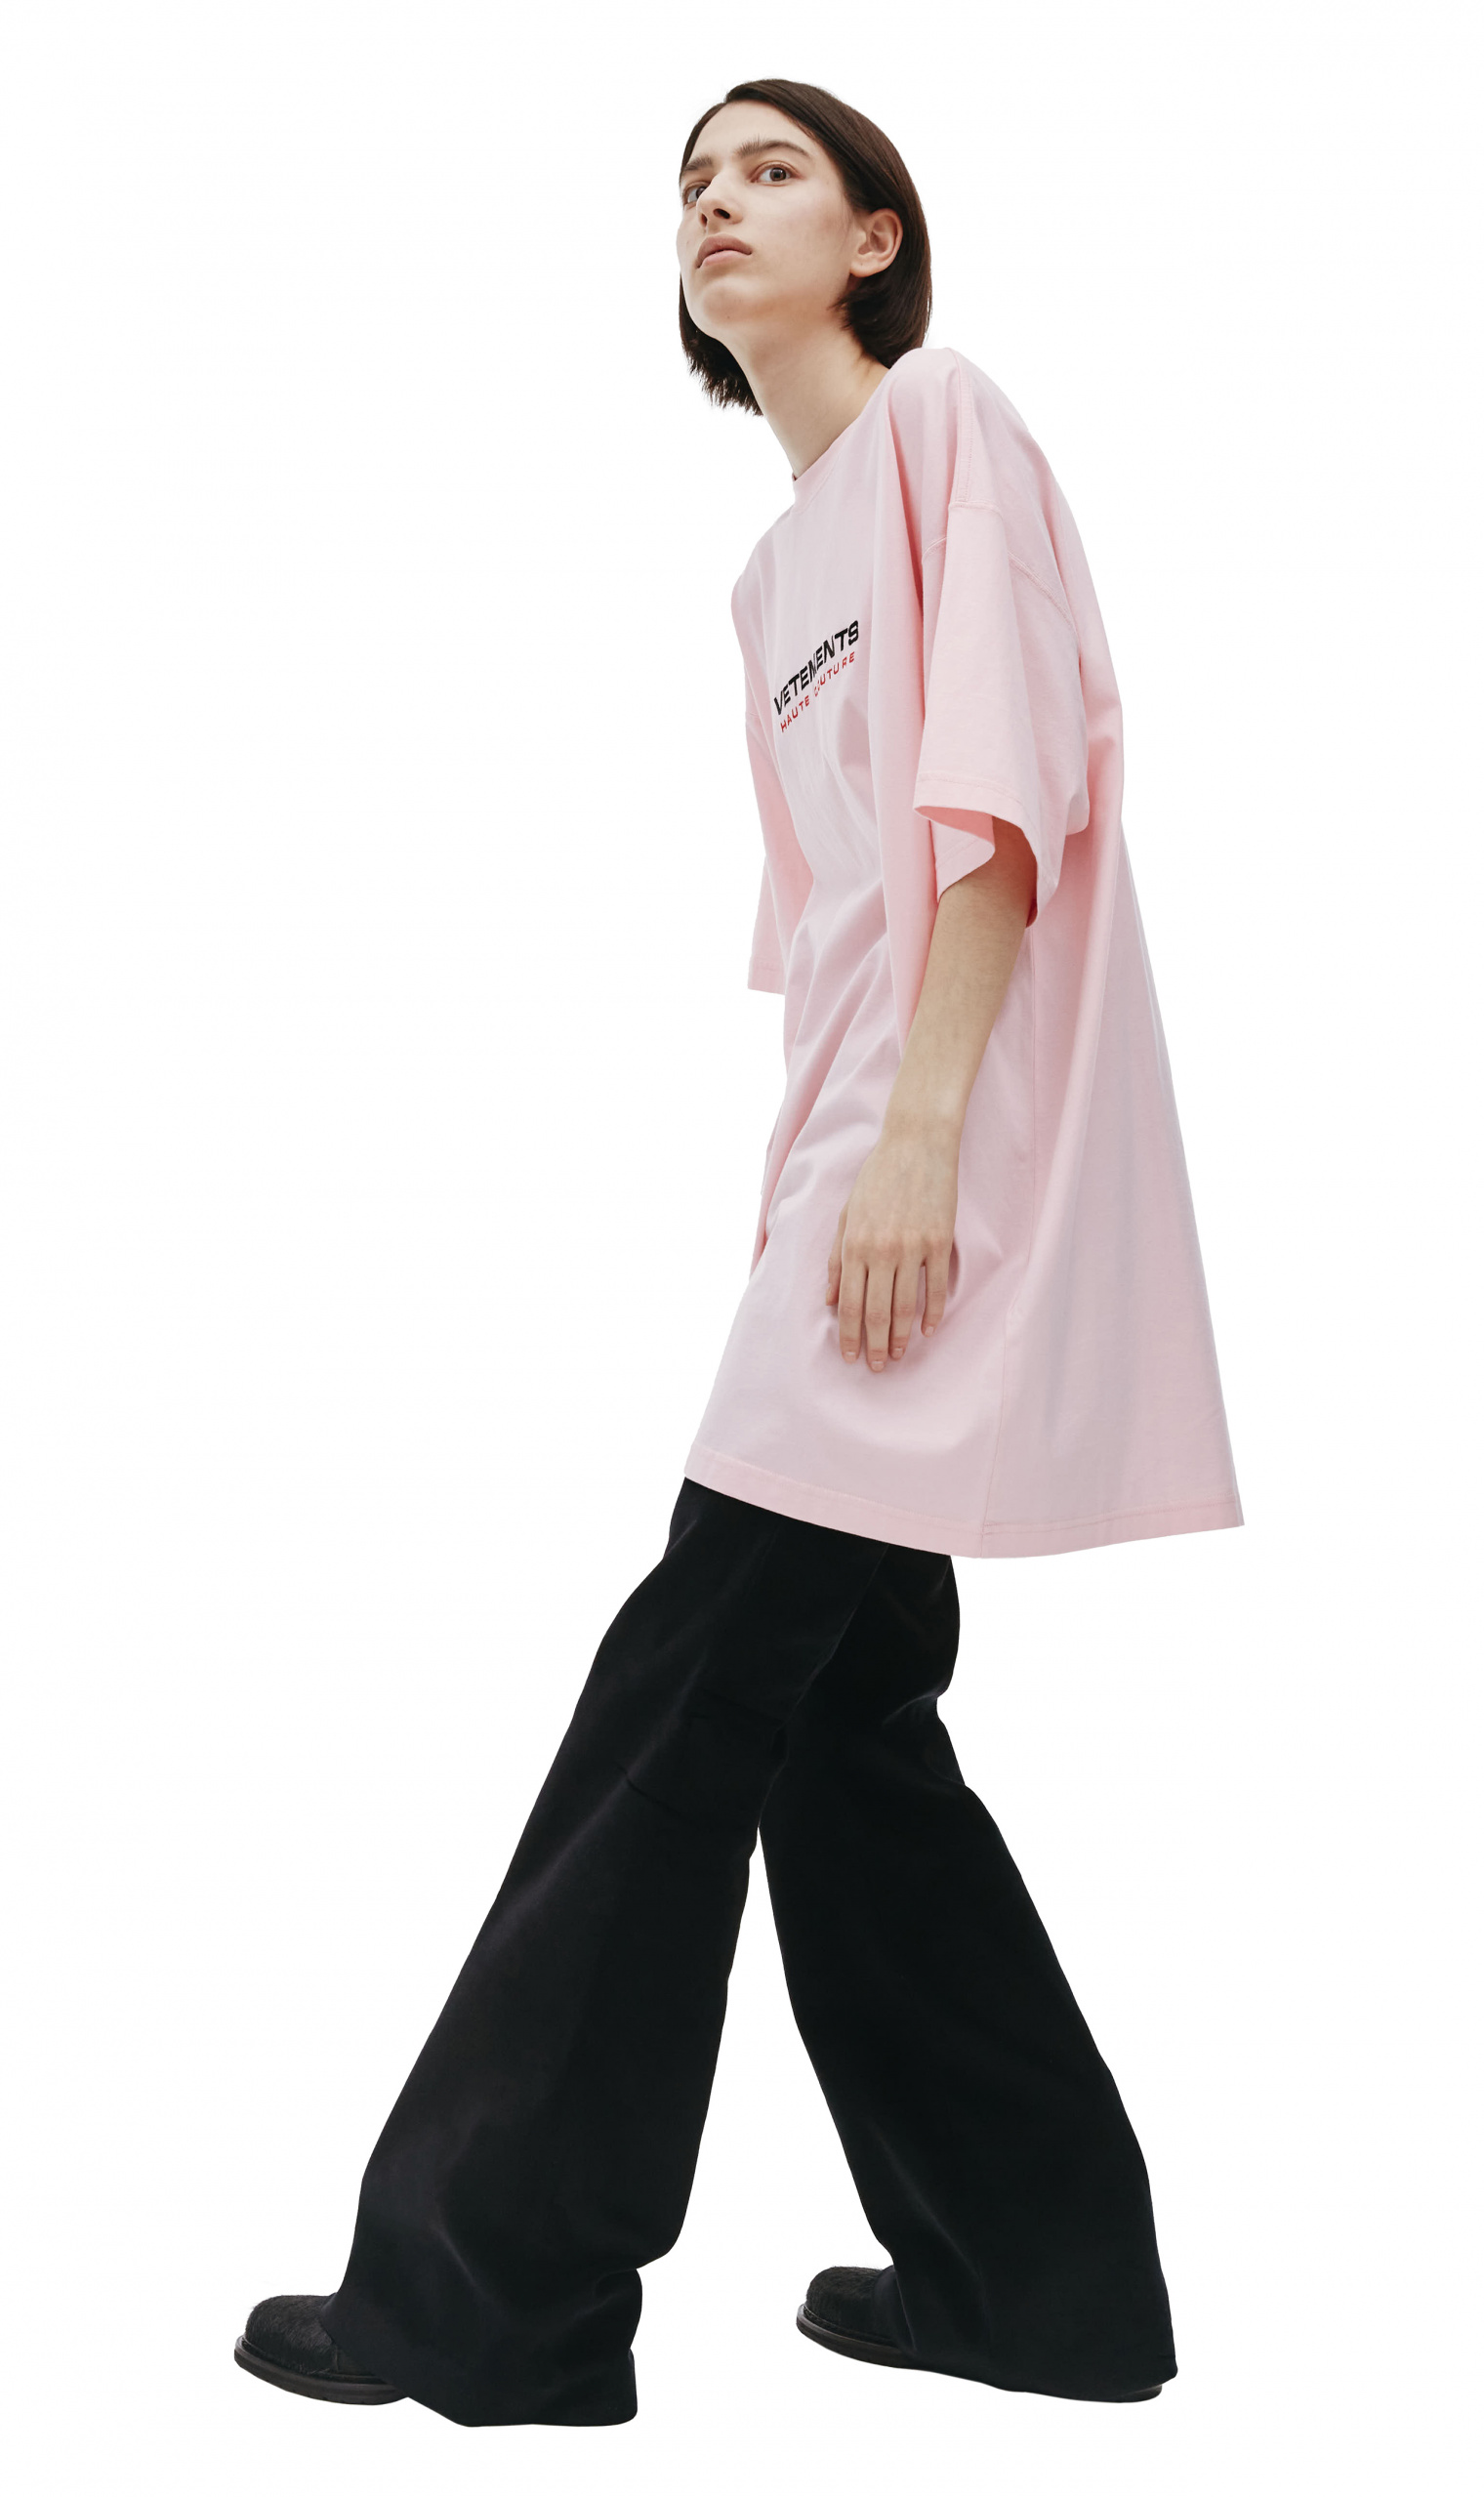 VETEMENTS Pink Haute Couture Embroidered T-Shirt